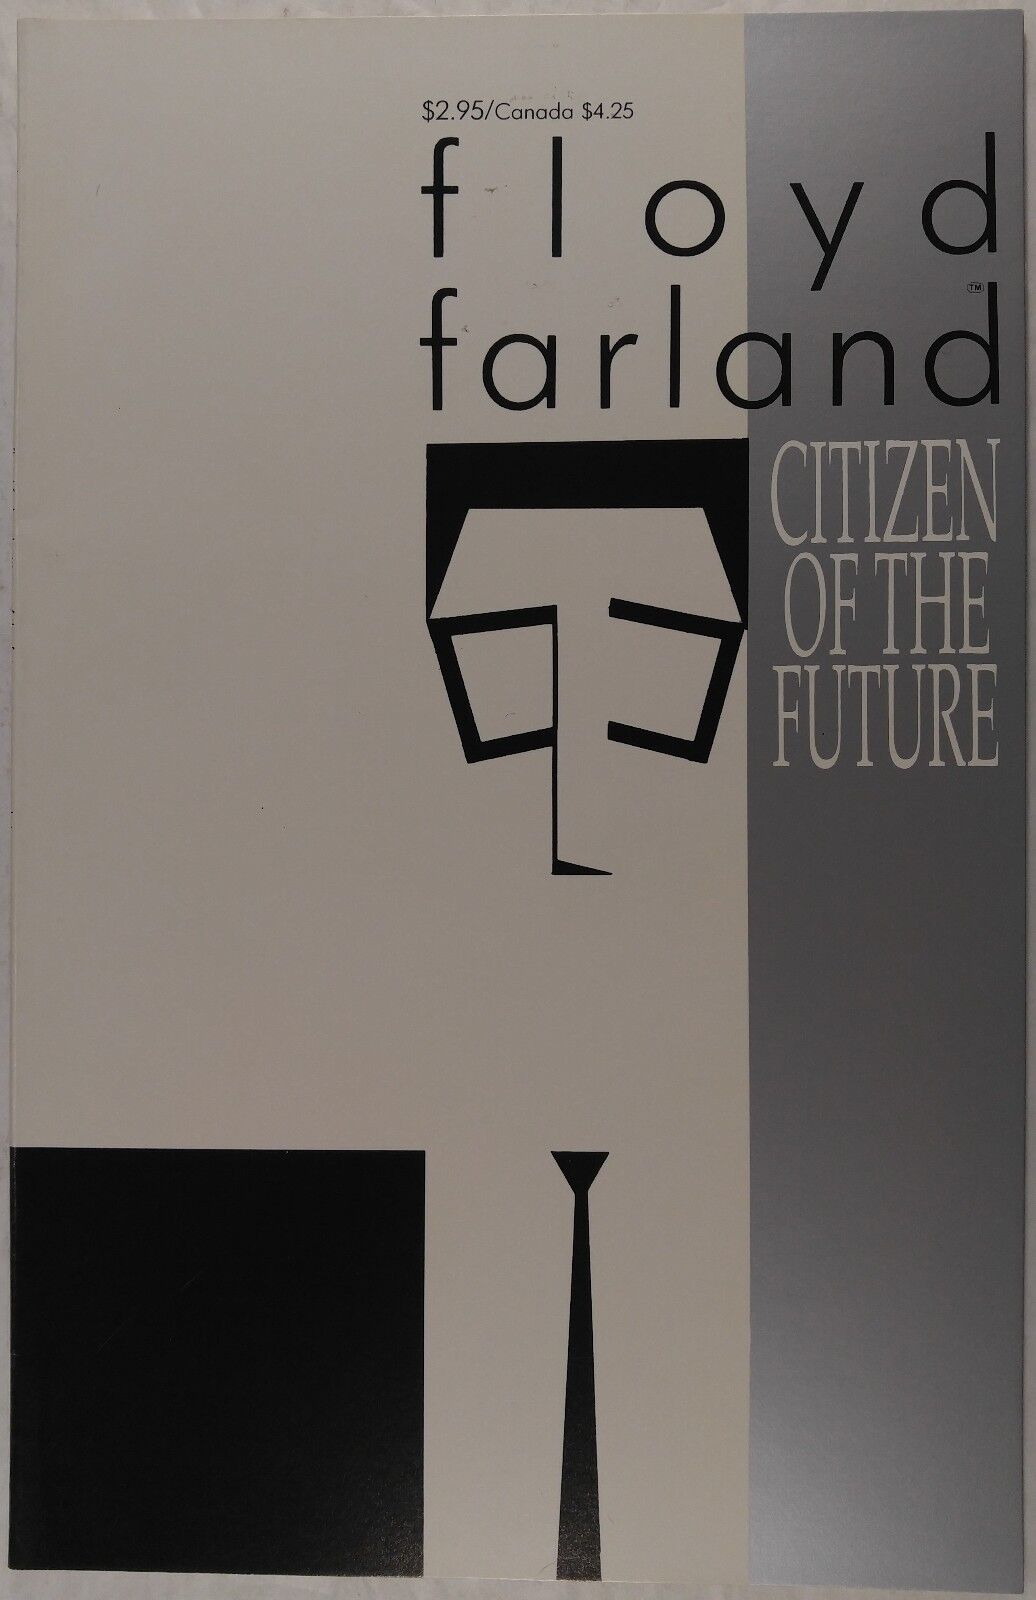 Chris Ware - FLOYD FARLAND: CITIZEN OF THE FUTURE [ACME NOVELTY]